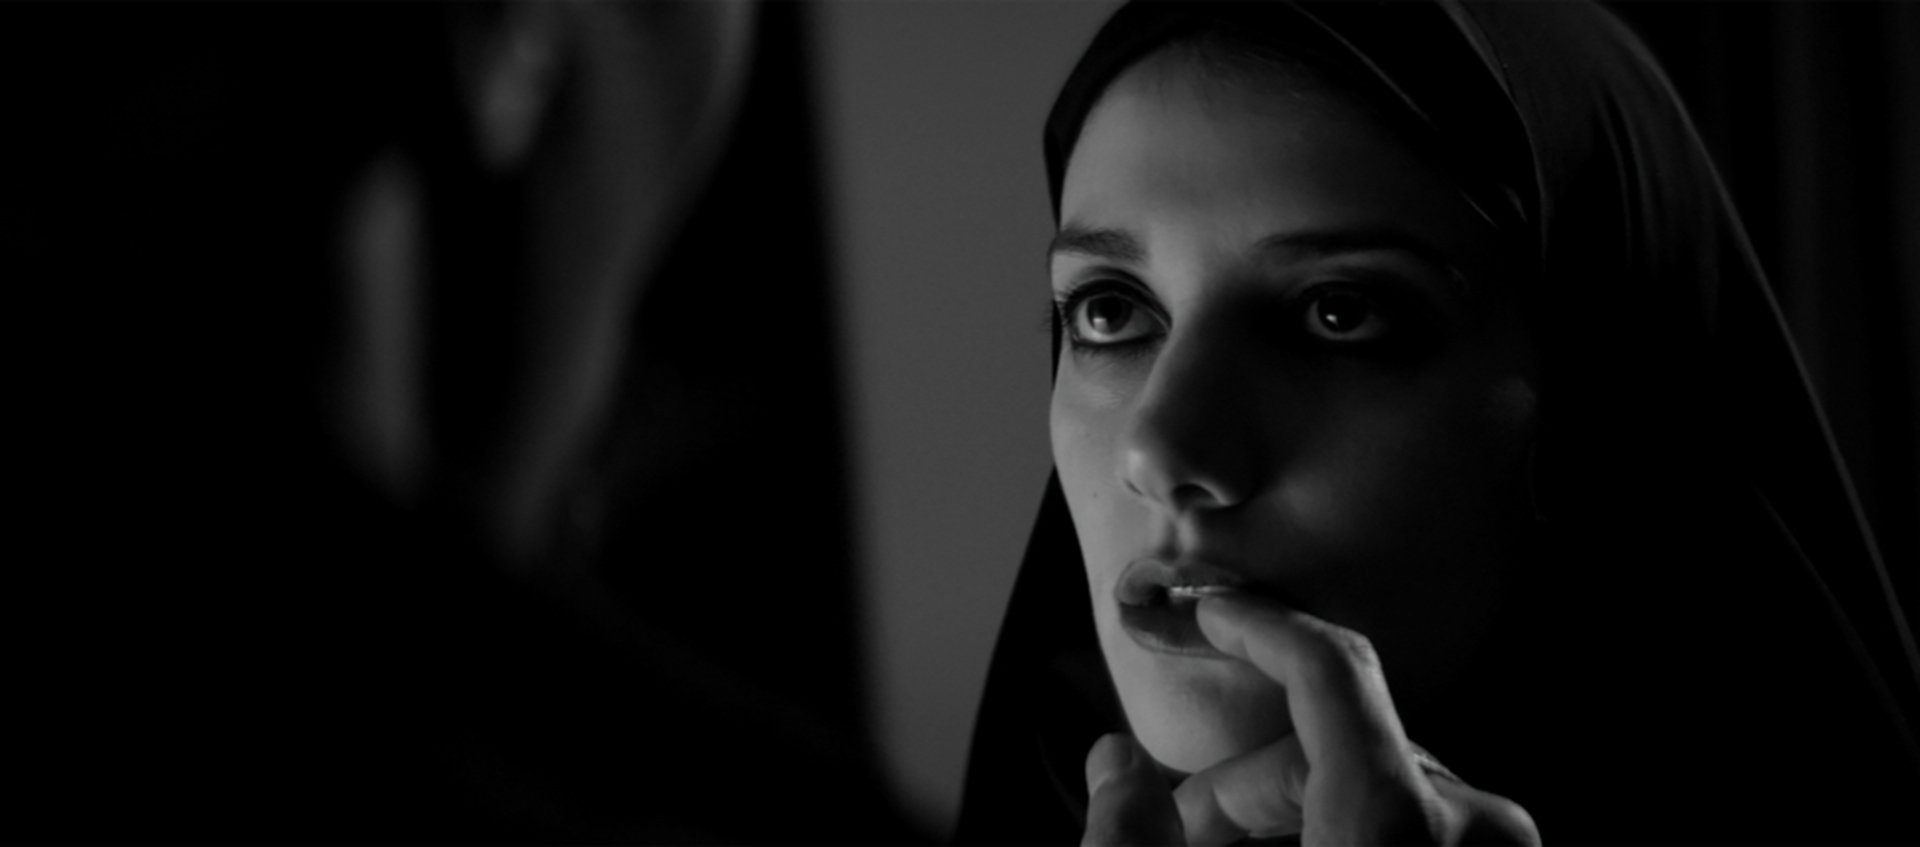 The Girl, who is wearing a dark chador. She is looking ahead at someone barely visible in front of her. The unknown person’s finger is touching the Girl’s bottom lip.